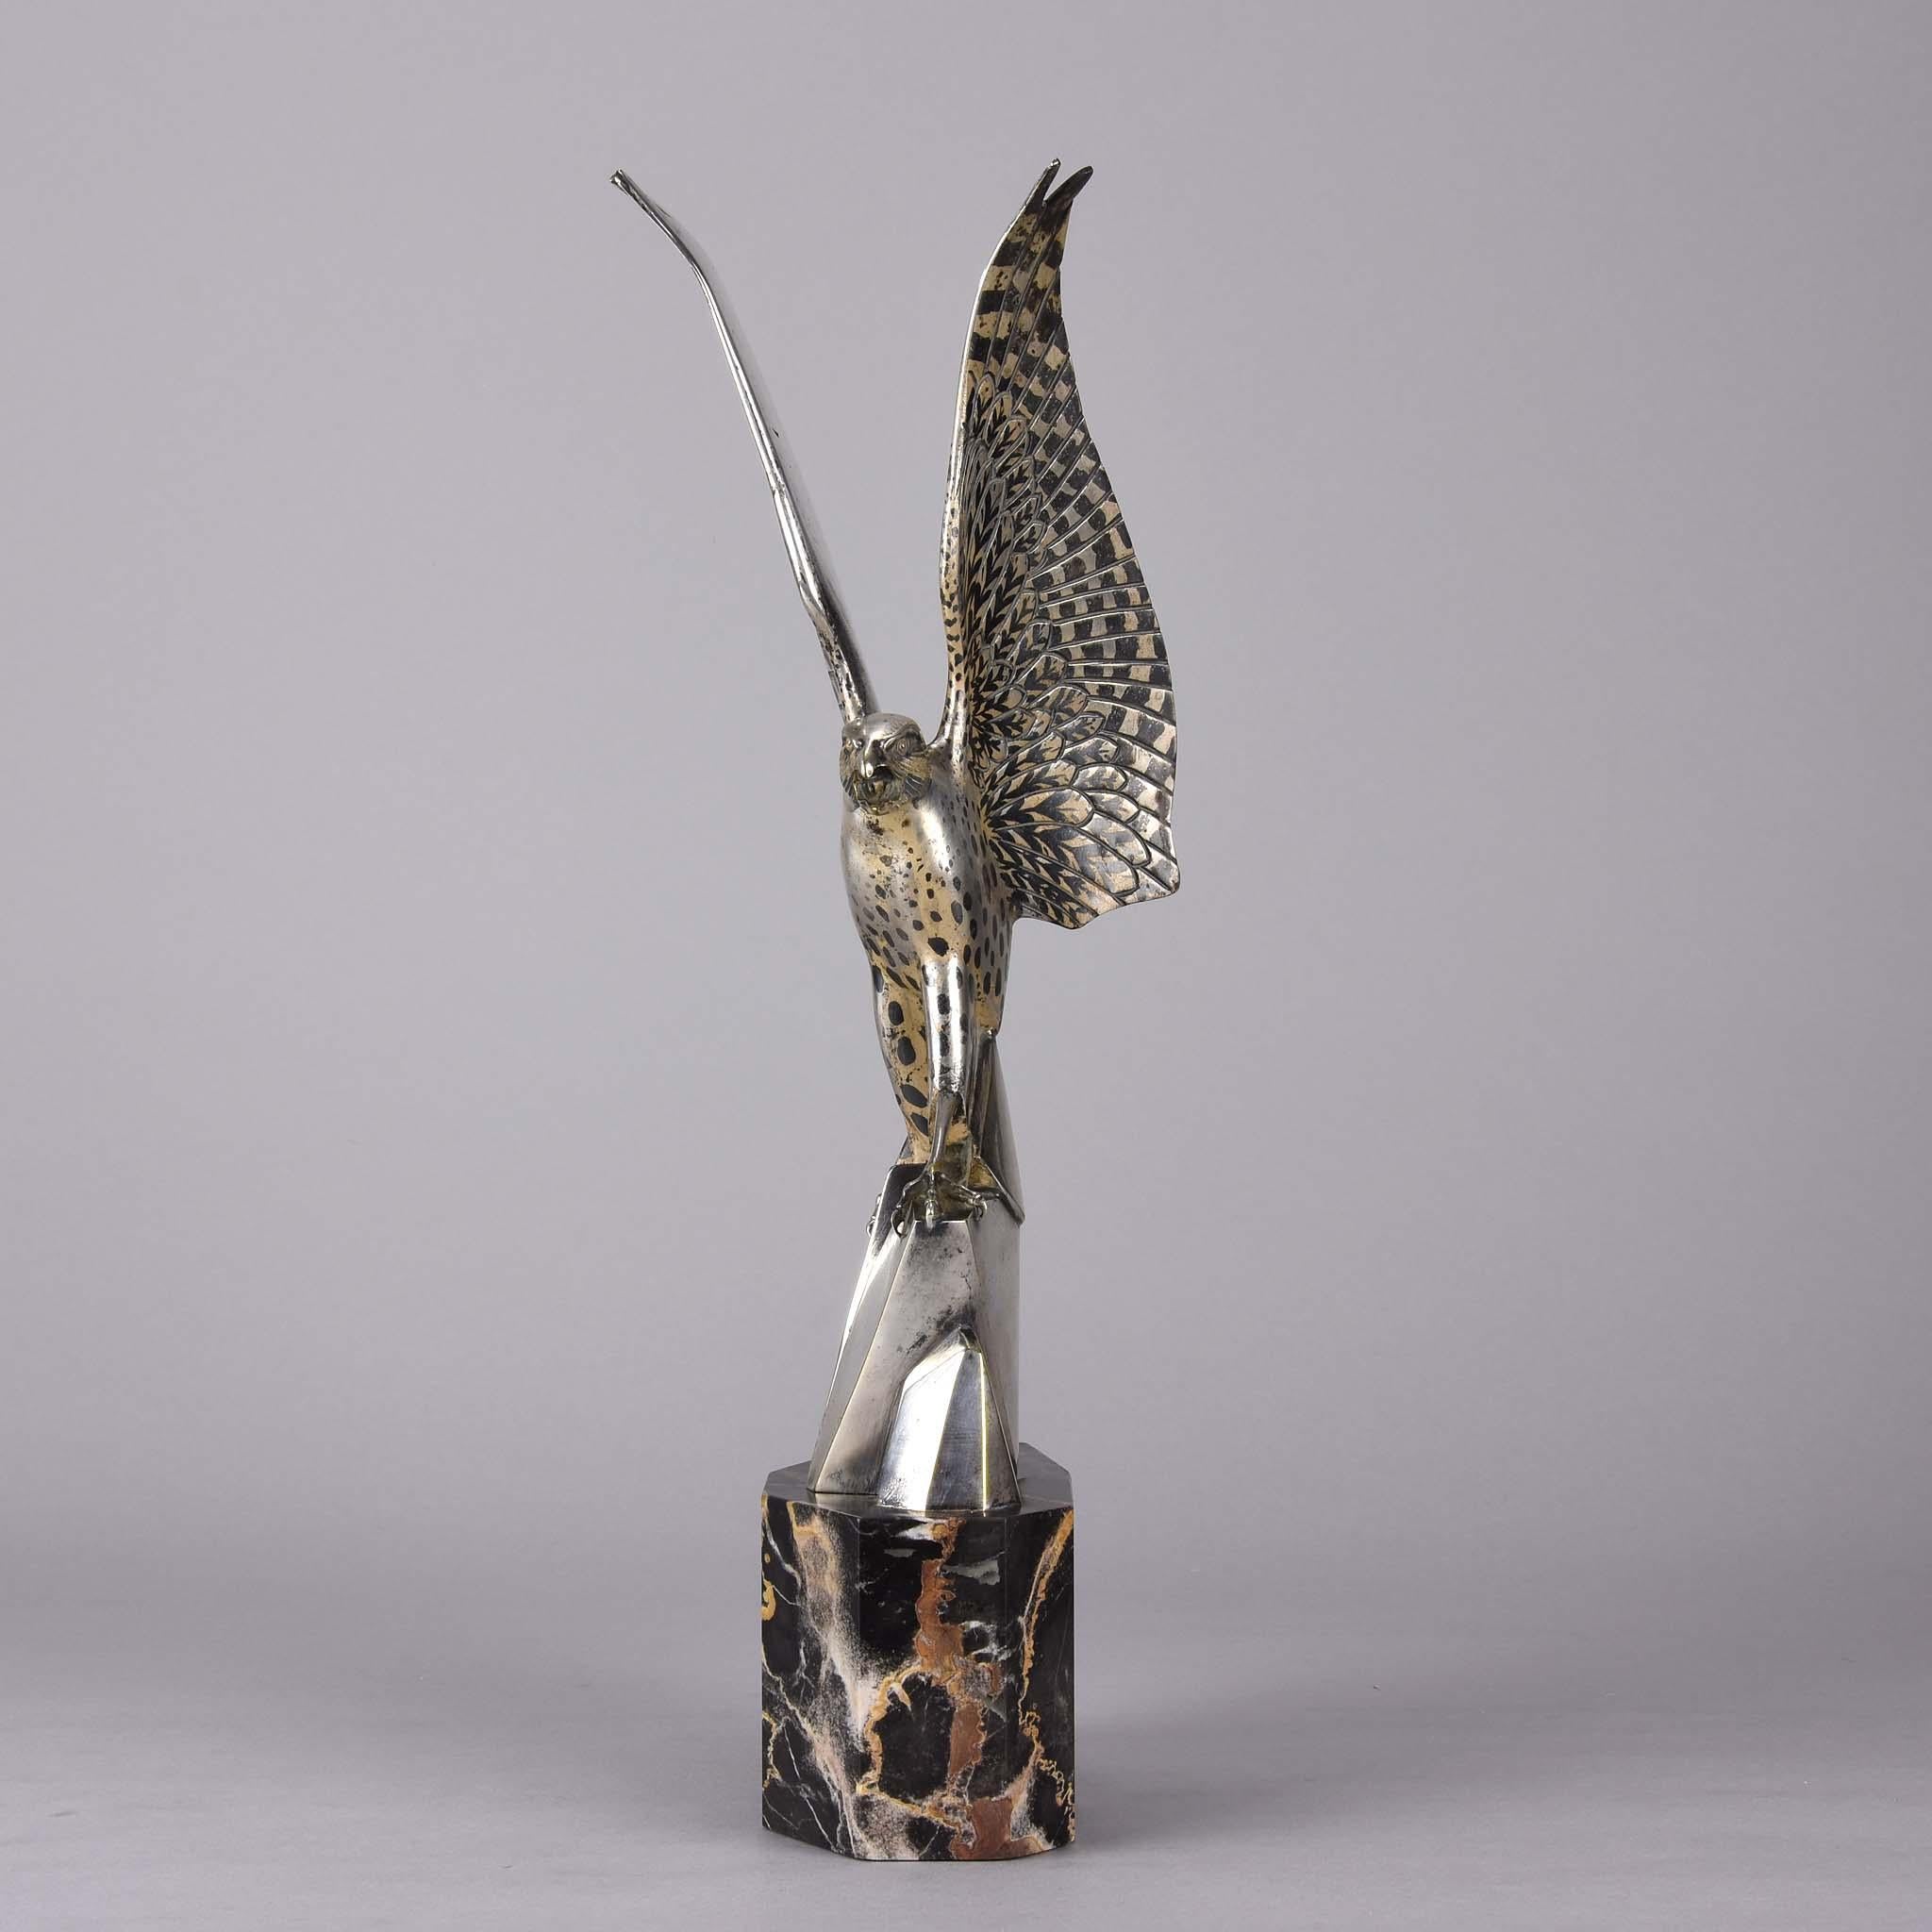 A wonderful early 20th century Art Deco silvered bronze figure of a falcon with wings raised and outspread, the surface highlighted with Niello decoration, chased with excellent surface detail, signed Rischmann to side of naturalistic rocky outcrop